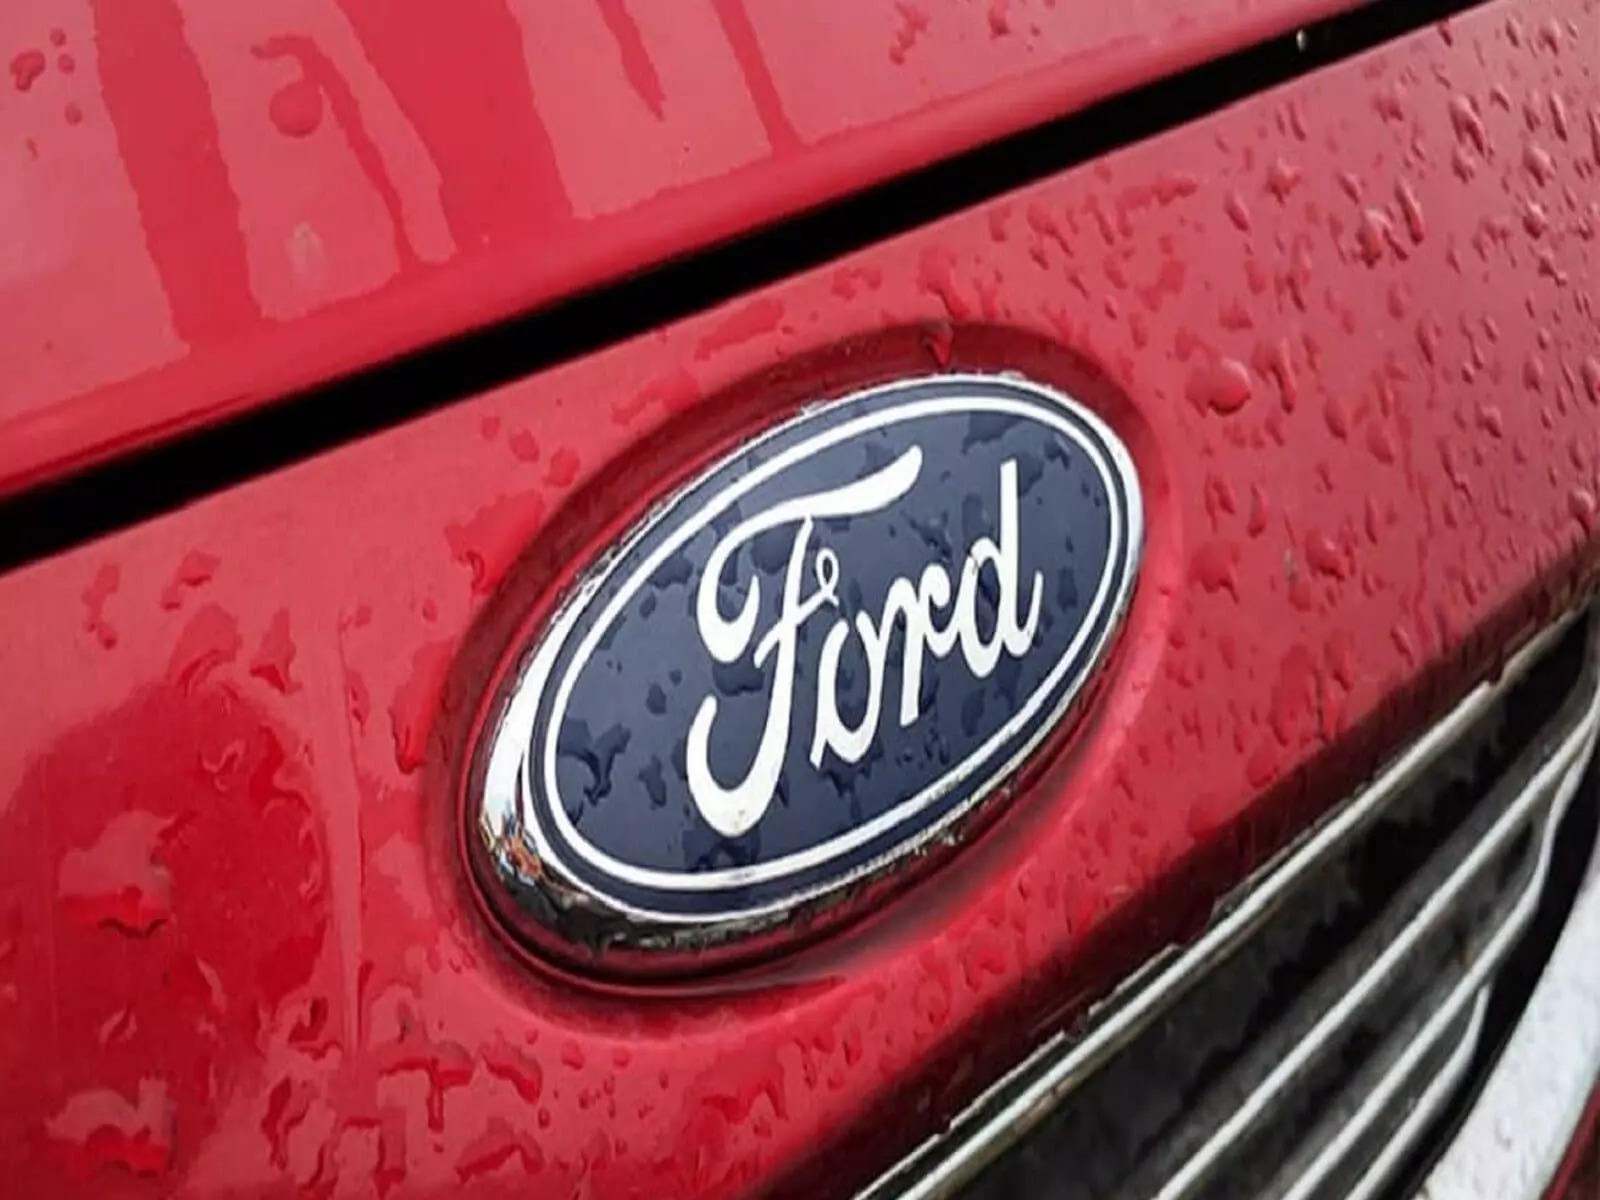 Ford Auto Sales 2021: Ford posts 7% fall in 2021 U.S. auto sales, ET Auto